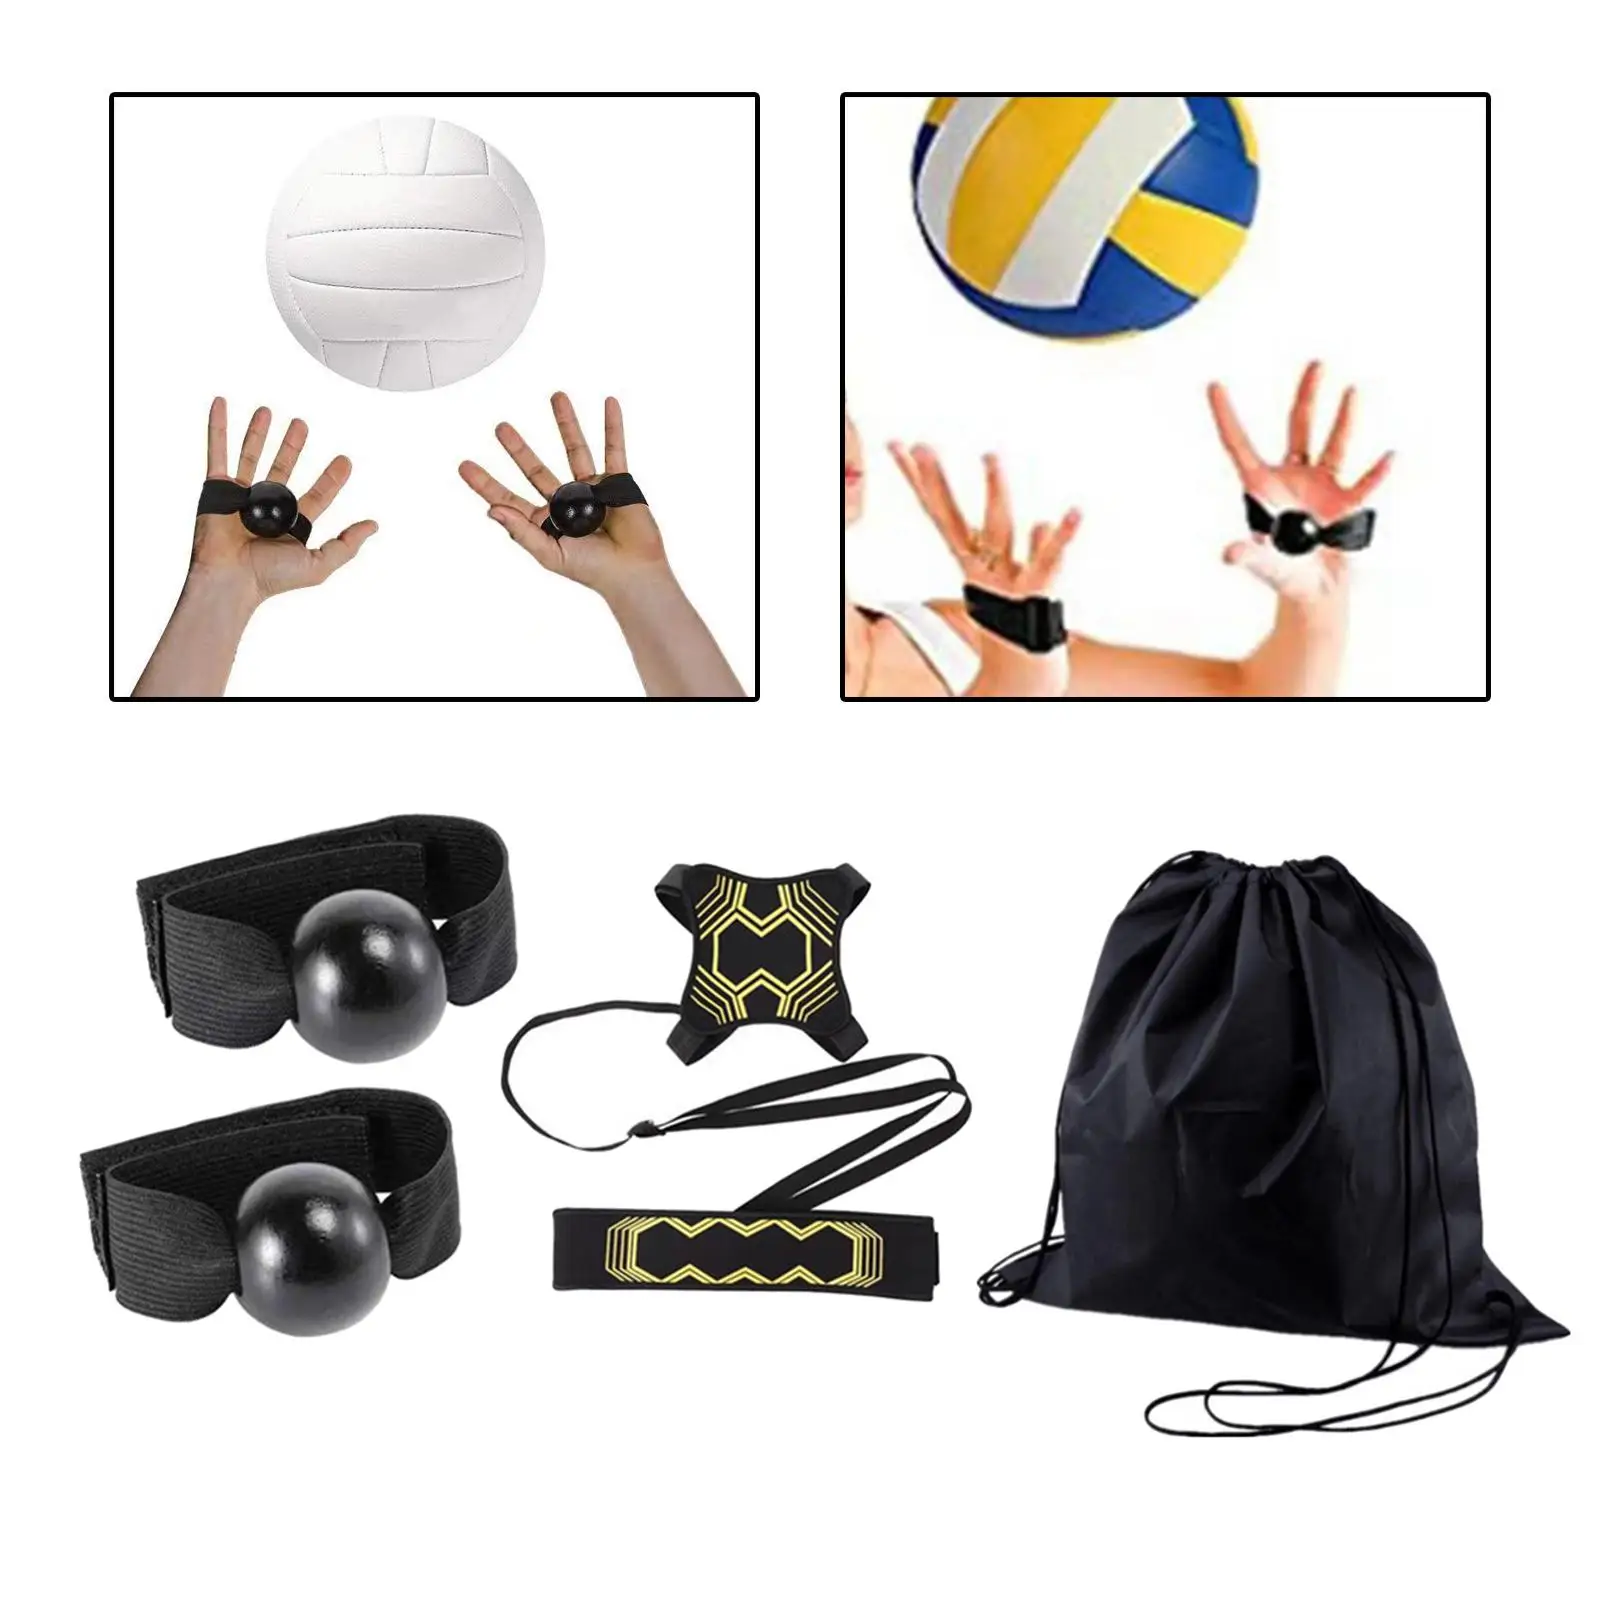 4 Pieces Volleyball Training Equipment Fits 22``-33.5`` Waists Adjustable Elastic Cord Solo Practice for Arm Swing Serving